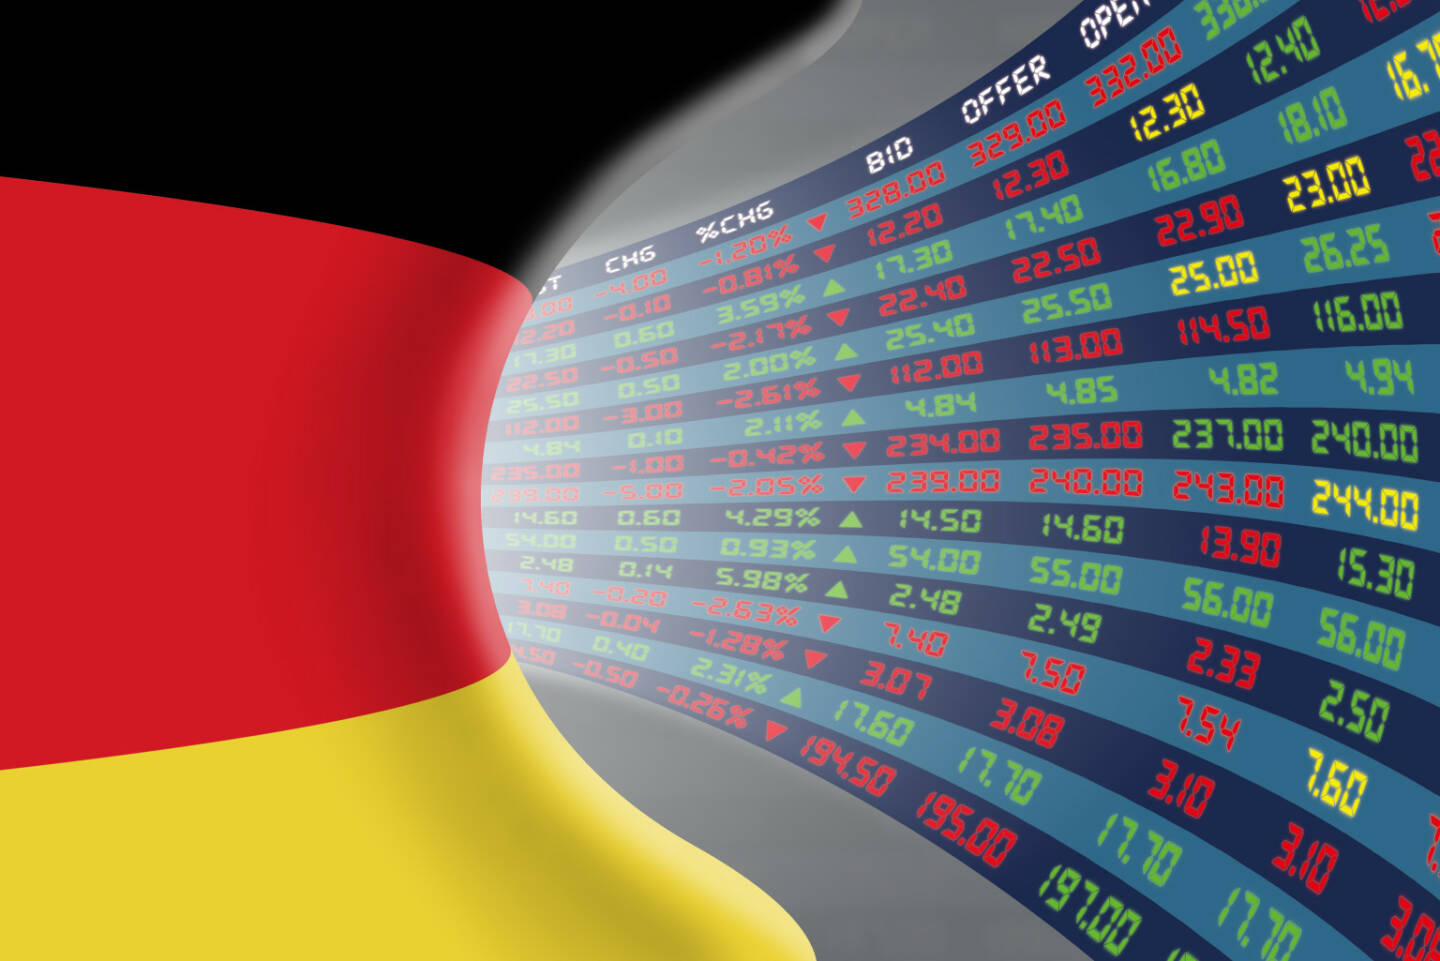 DAX, Kurszettel, rot, grün http://www.shutterstock.com/de/pic-361977842/stock-photo-national-flag-of-germany-with-a-large-display-of-daily-stock-market-price-and-quotations-during.html